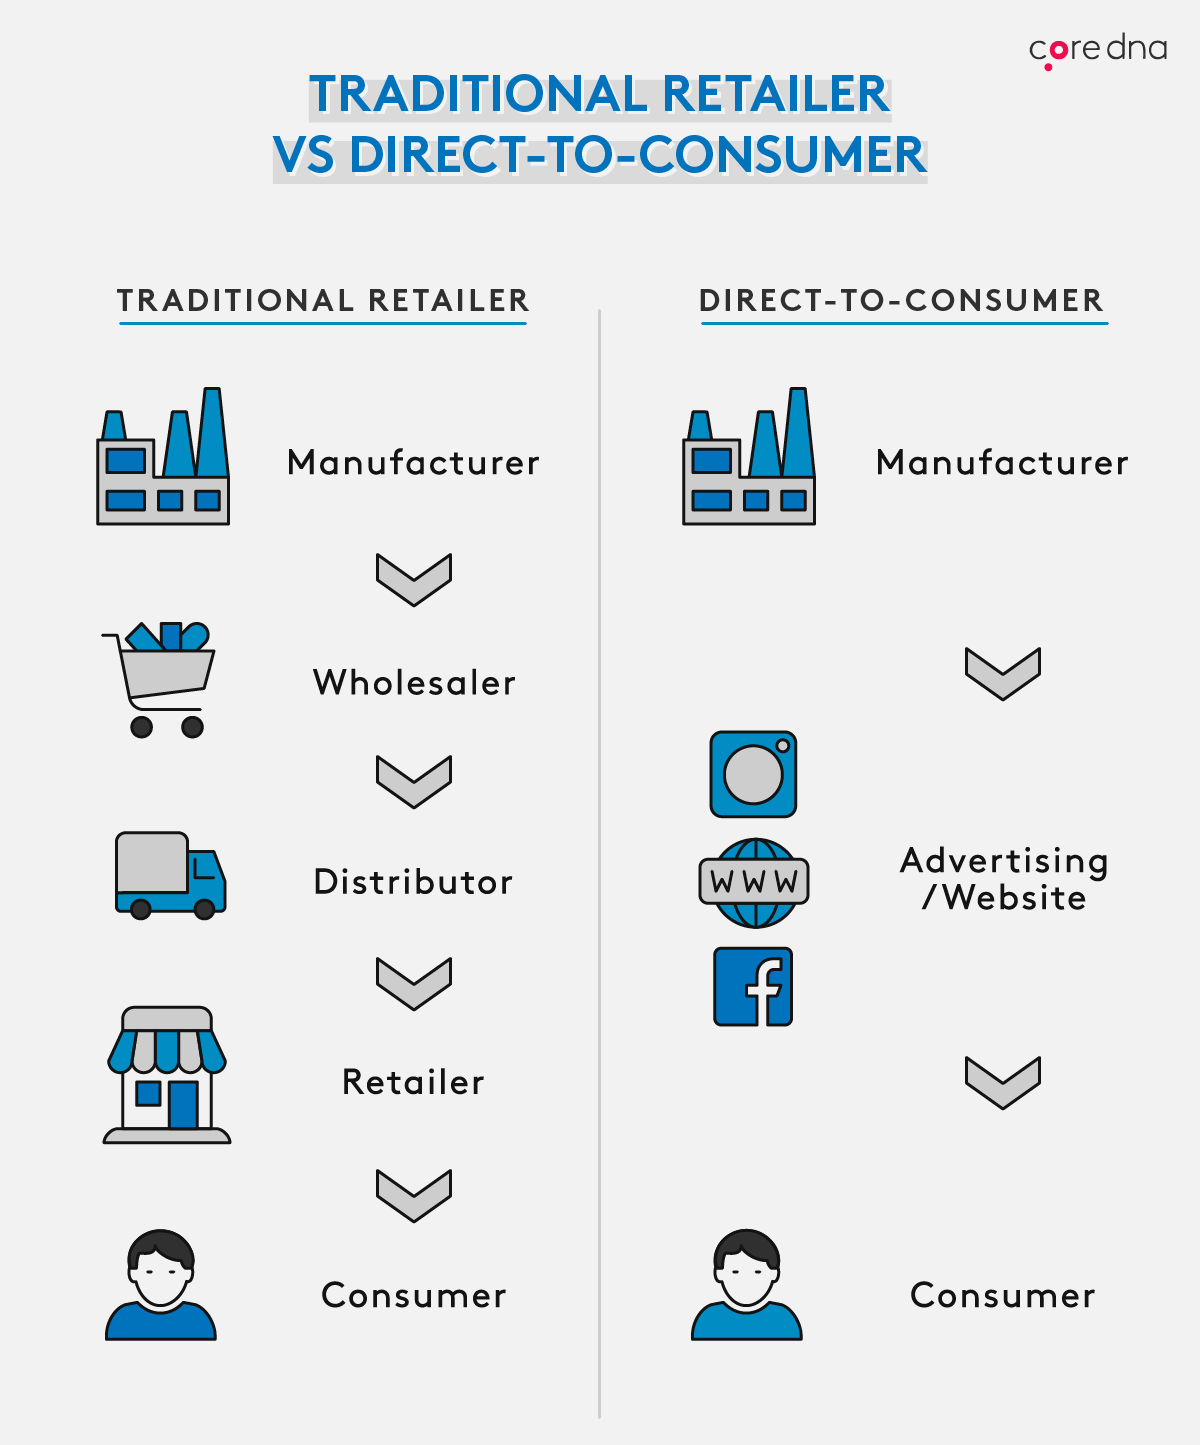 Traditional retailer vs Direct-to-consumer